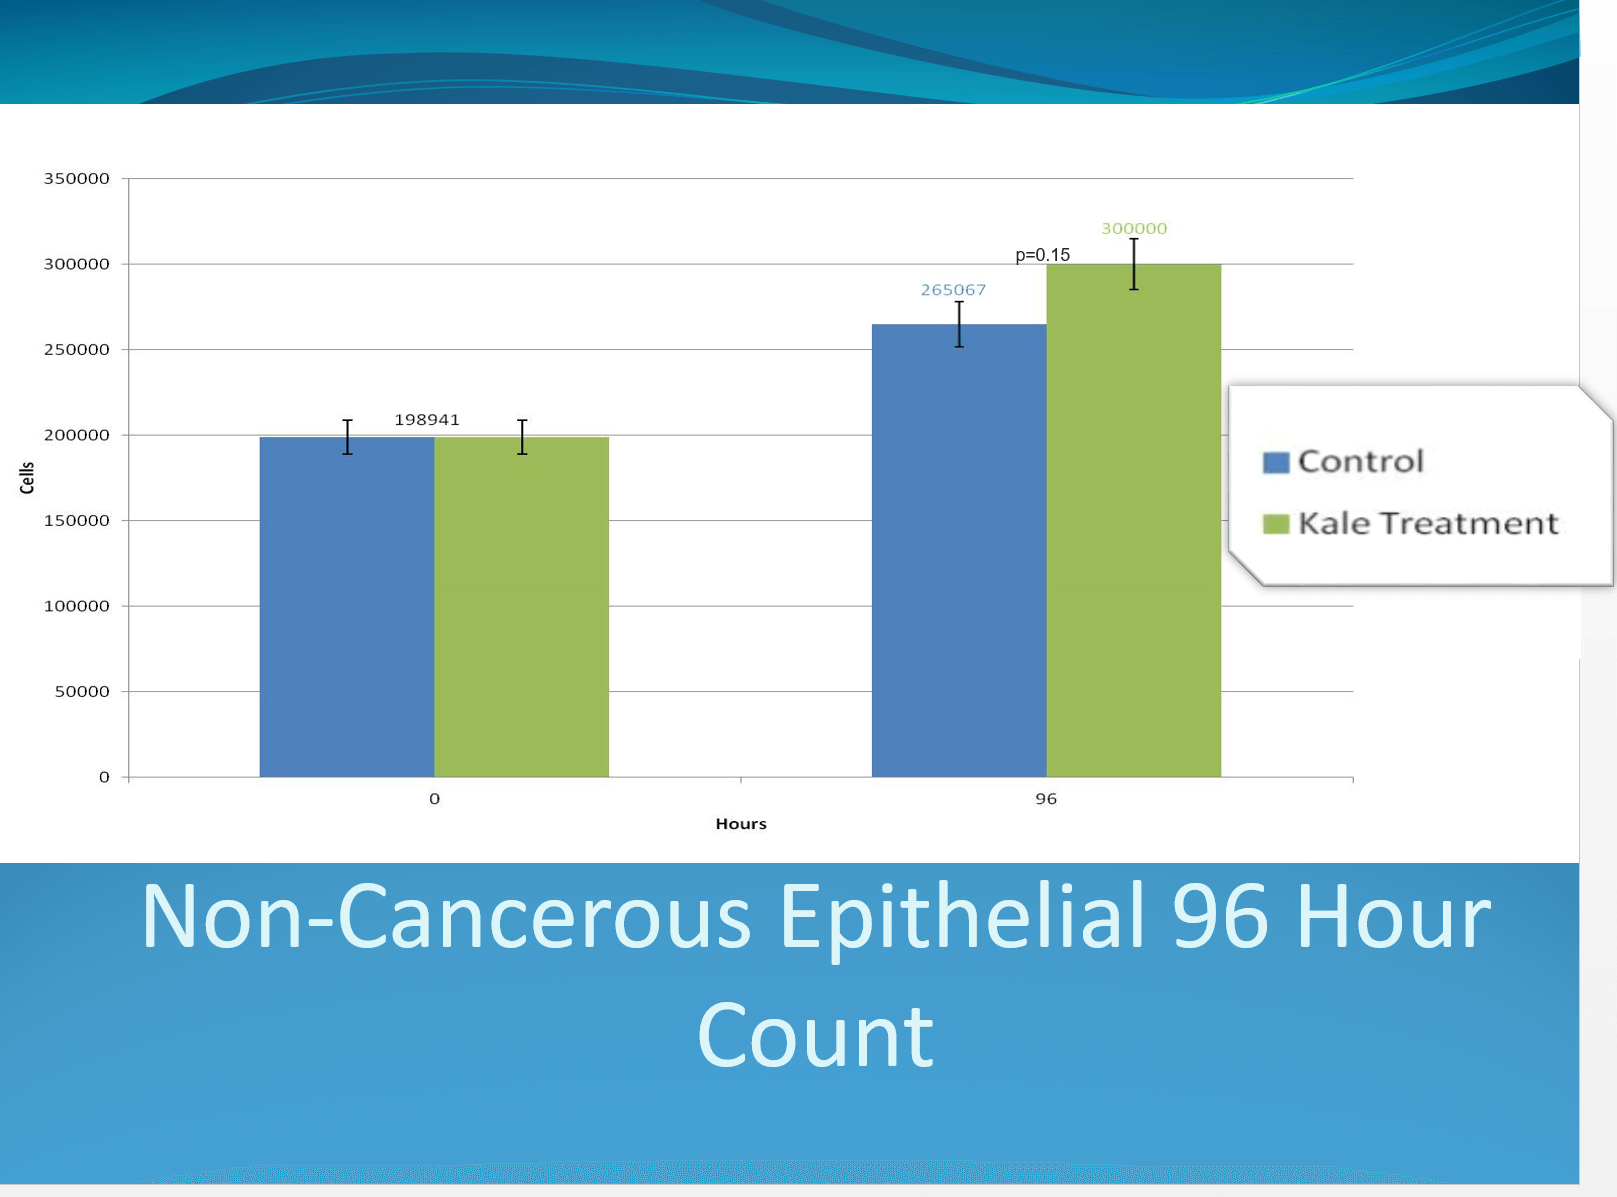 Powerpoint slide illustrating non-cancerous epithelial conditions discussed by Bilal Qizilbash at UFS Yale 2015.